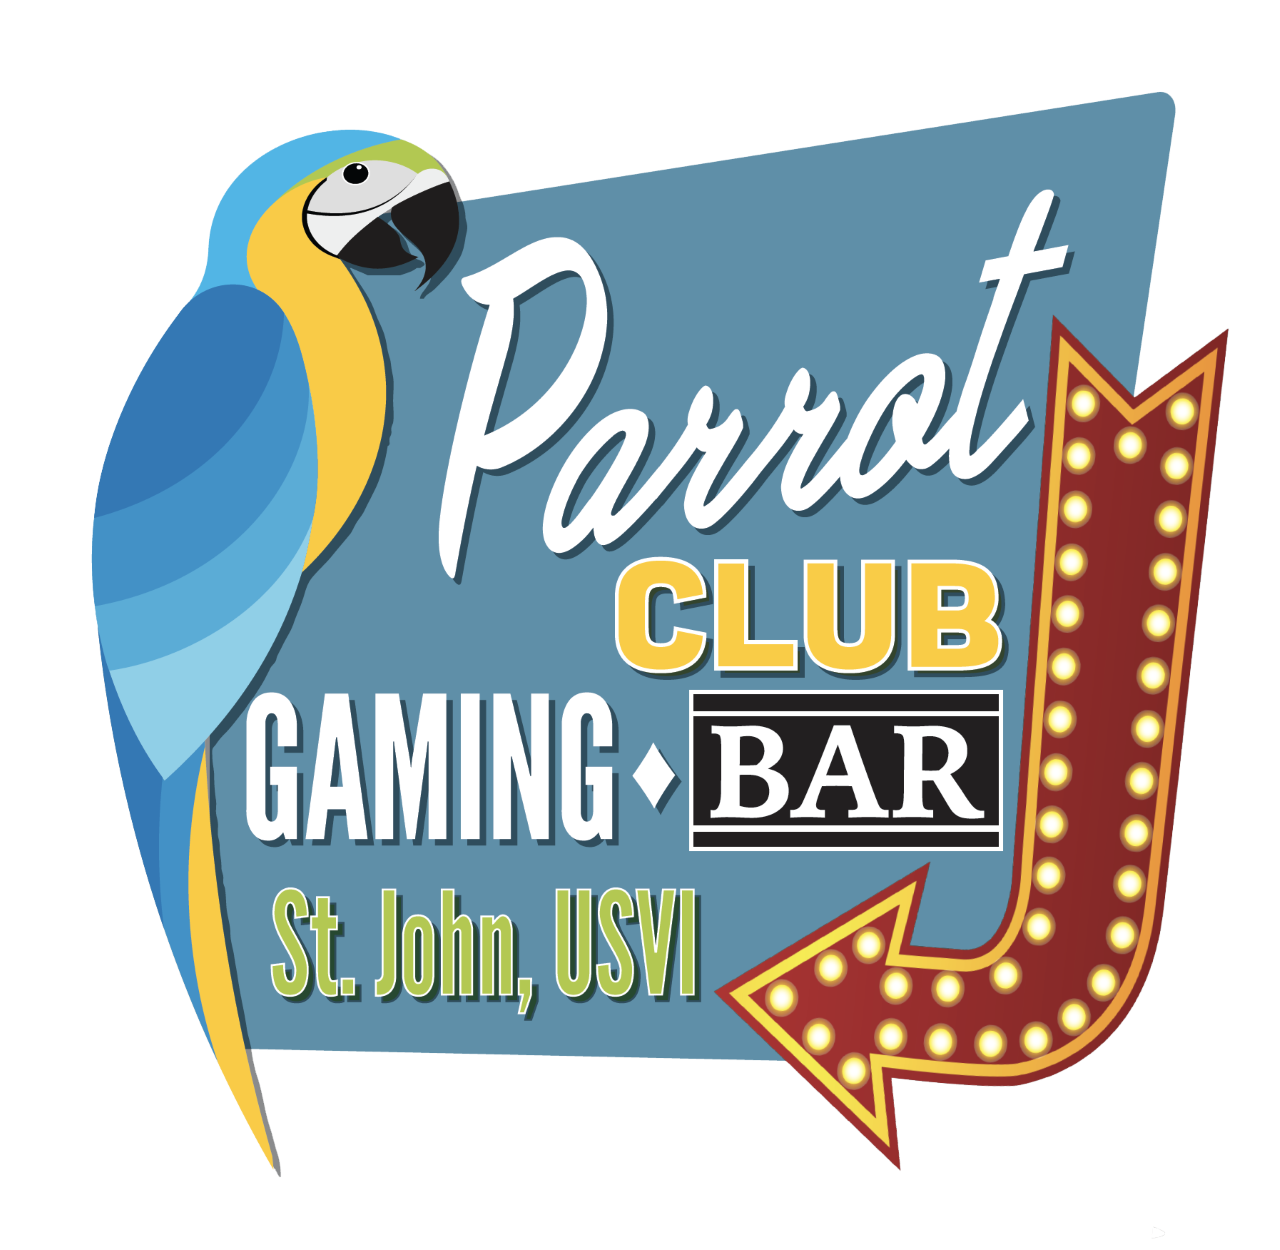 The Parrot Club